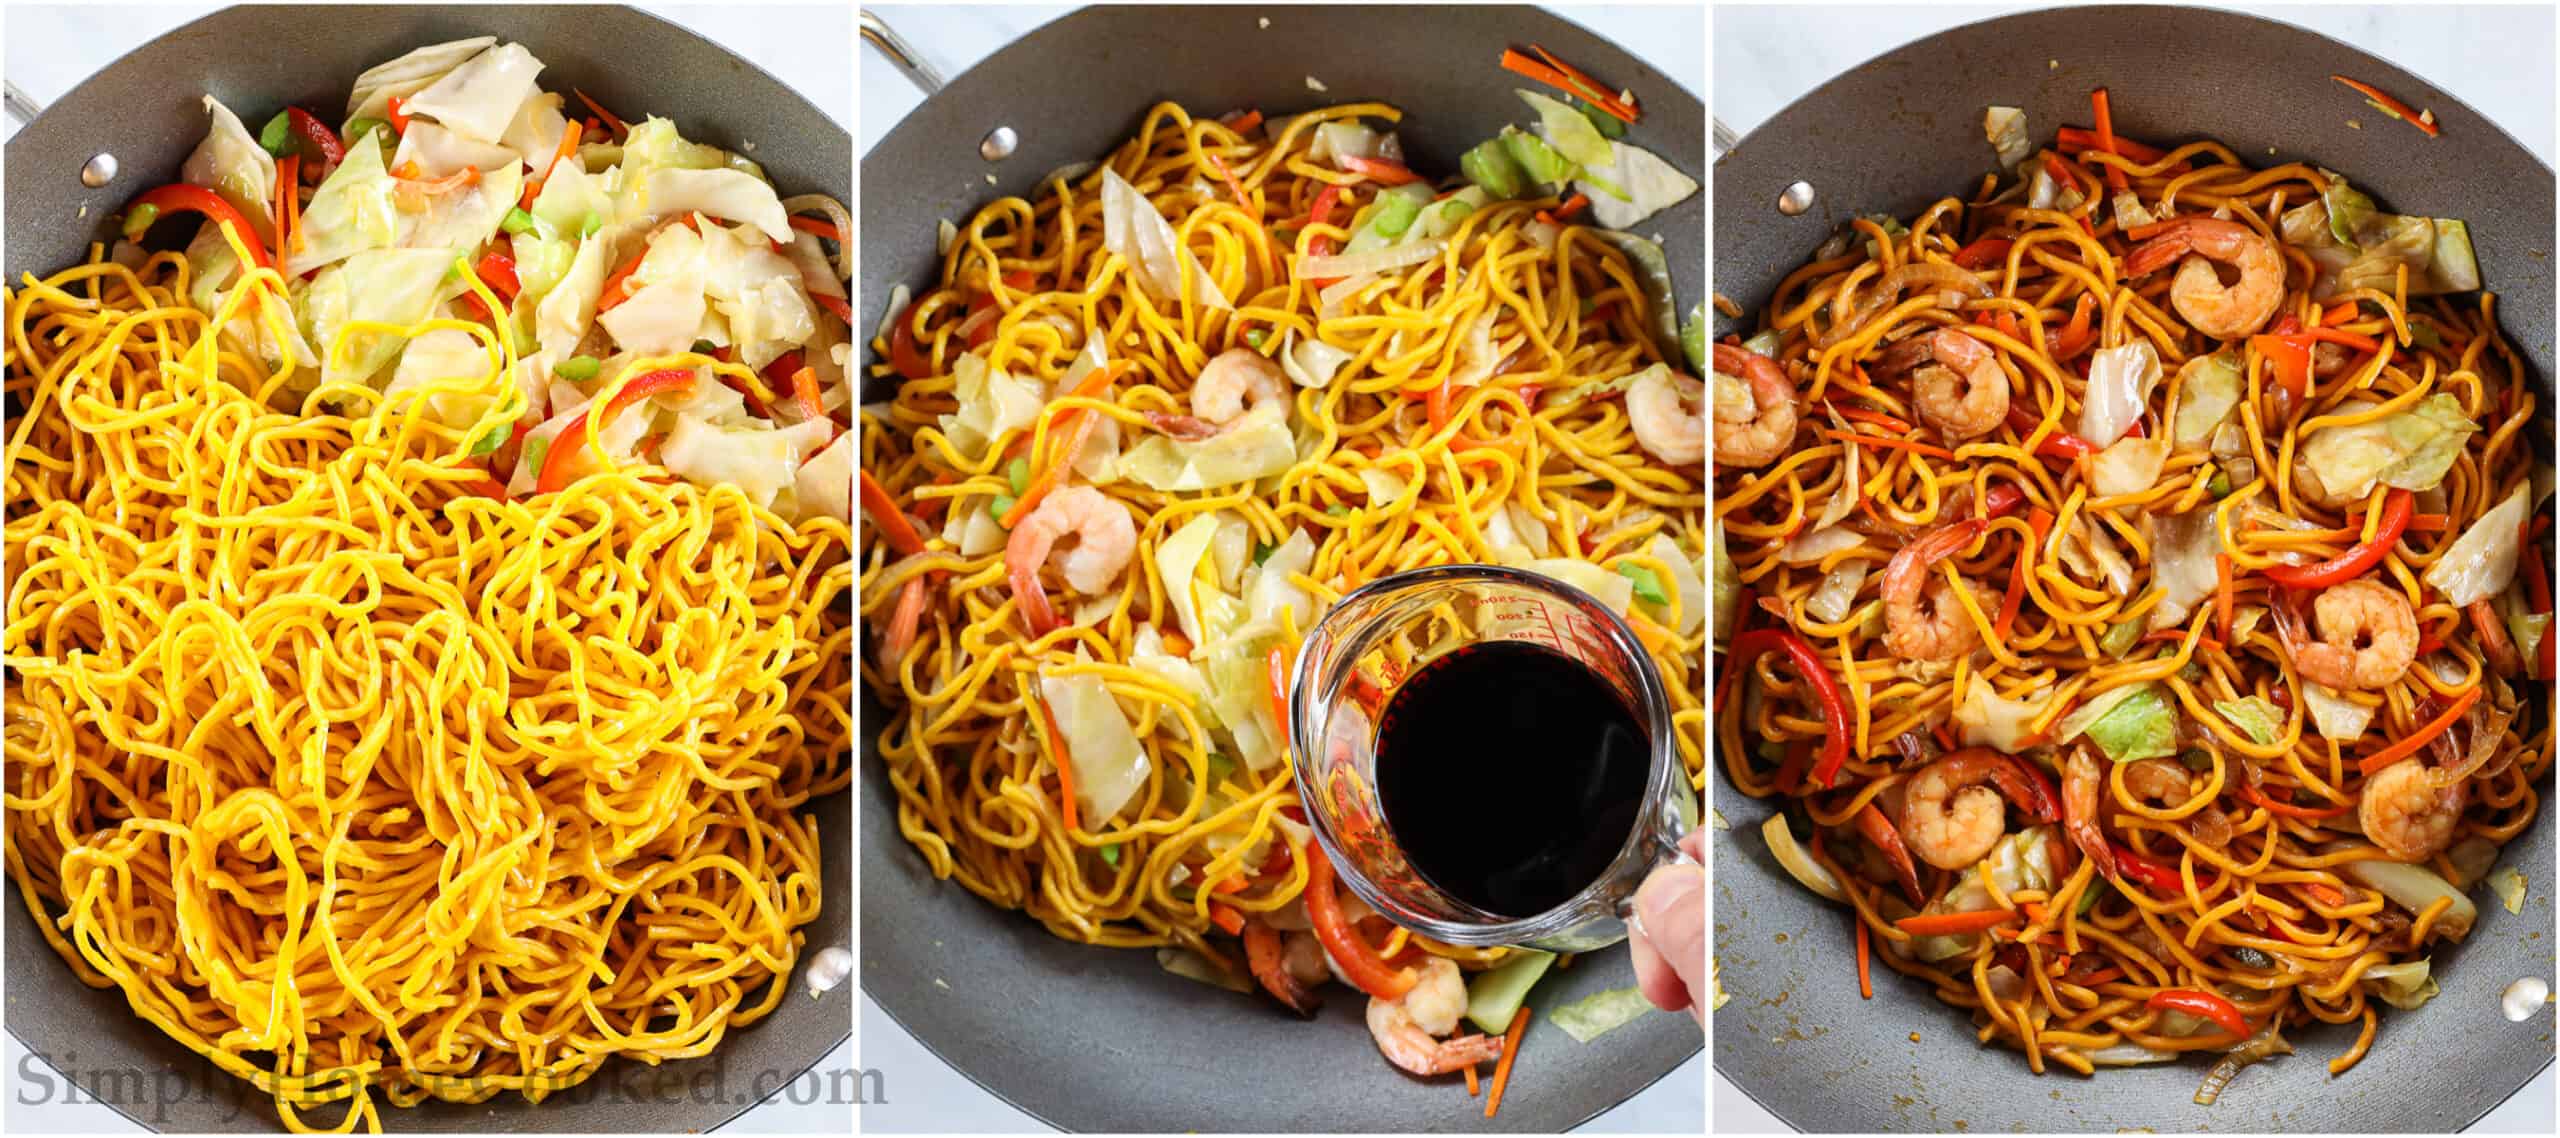 Steps to make 30-Minute Shrimp Chow Mein, including adding the yakisoba noodles to the vegetables and shrimp, and then adding the sauces, stirring until combined.